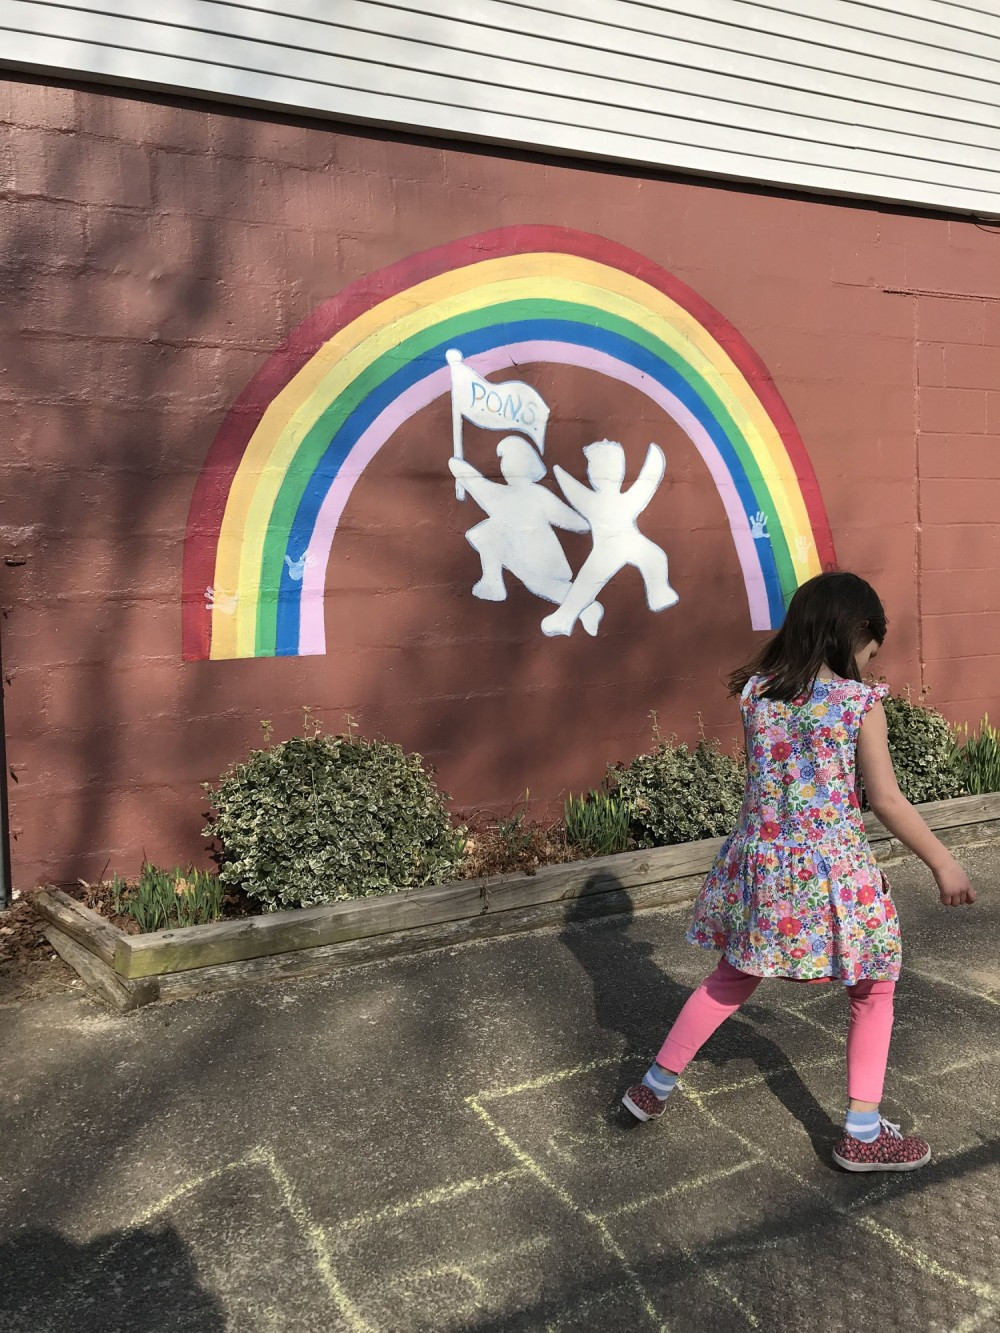 Child playing hopscotch in front of a mural of the Pine Orchard Nursery School logo.